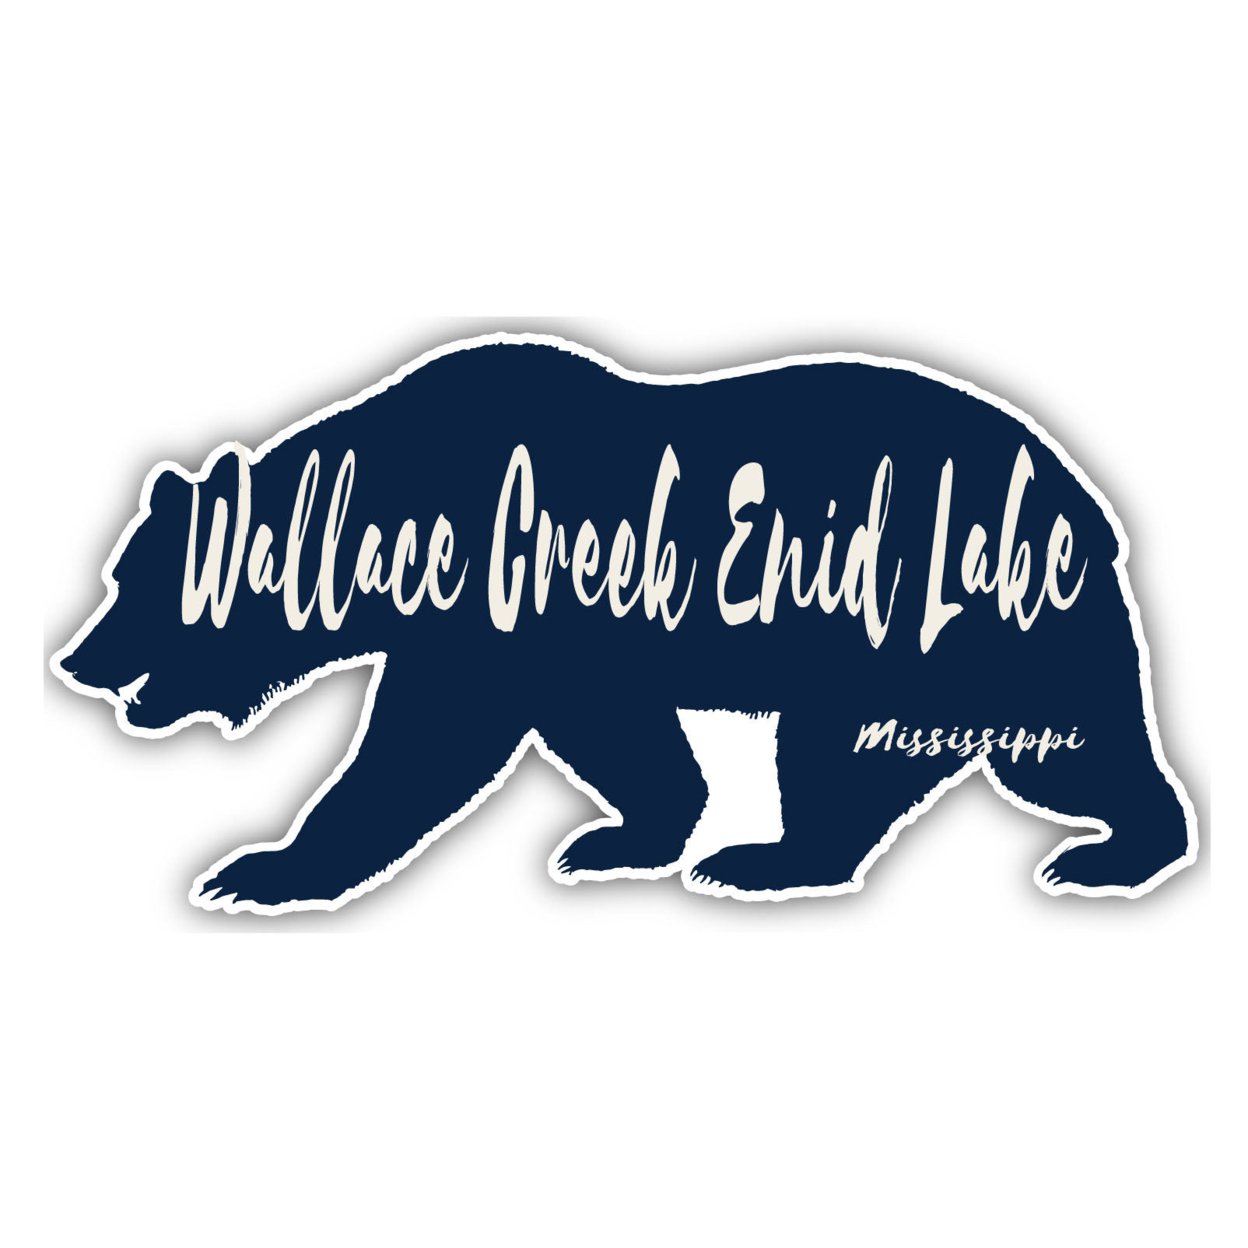 Wallace Creek Enid Lake Mississippi Souvenir Decorative Stickers (Choose Theme And Size) - Single Unit, 4-Inch, Bear